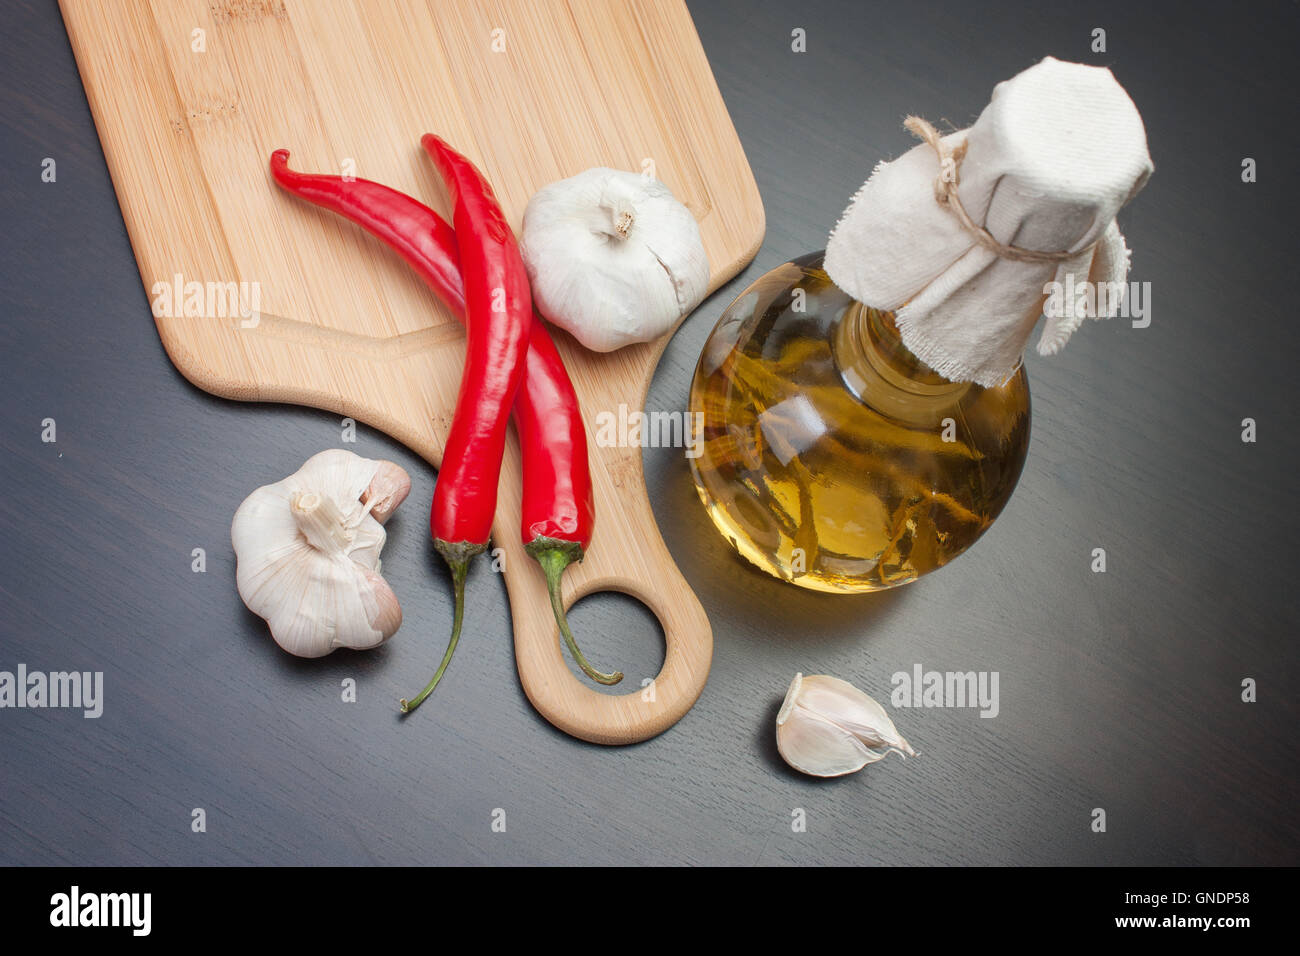 vegetables and cooking utensils Stock Photo